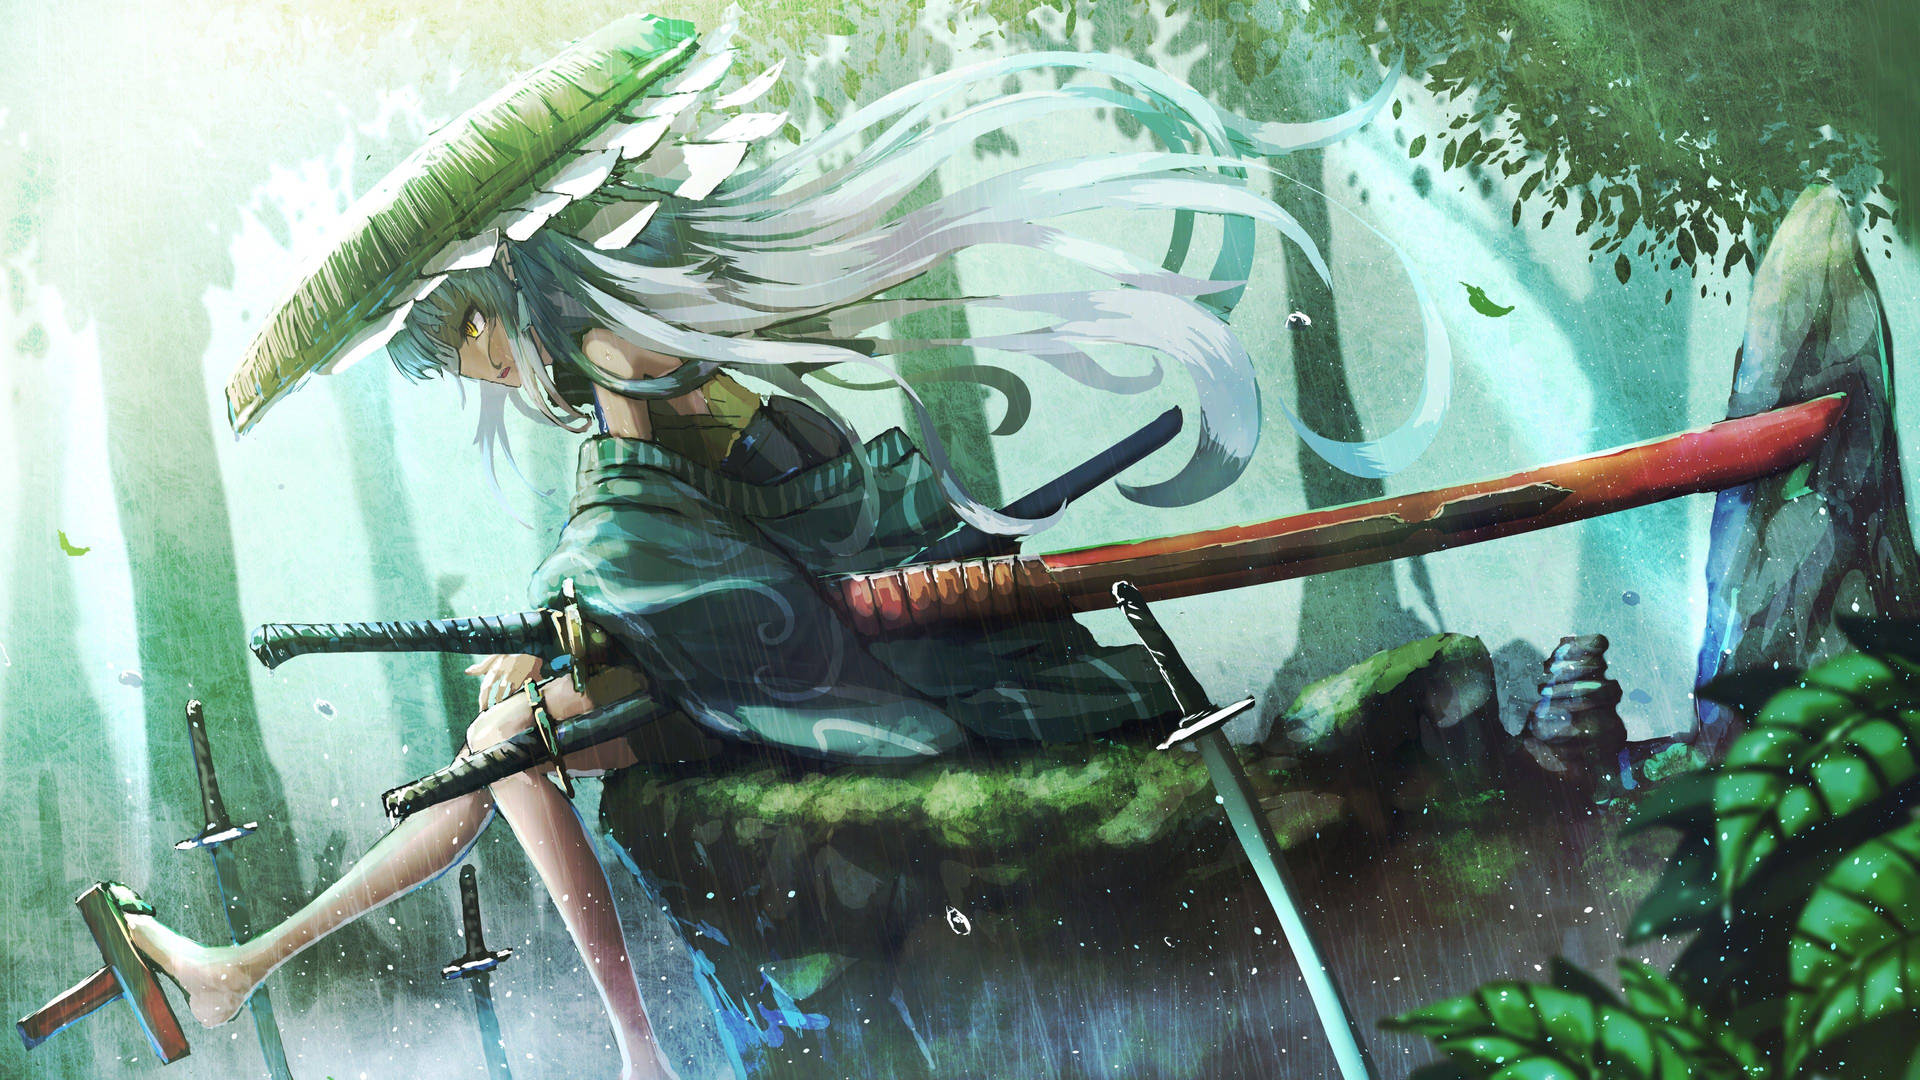 A determined and brave anime samurai charging into battle. Wallpaper